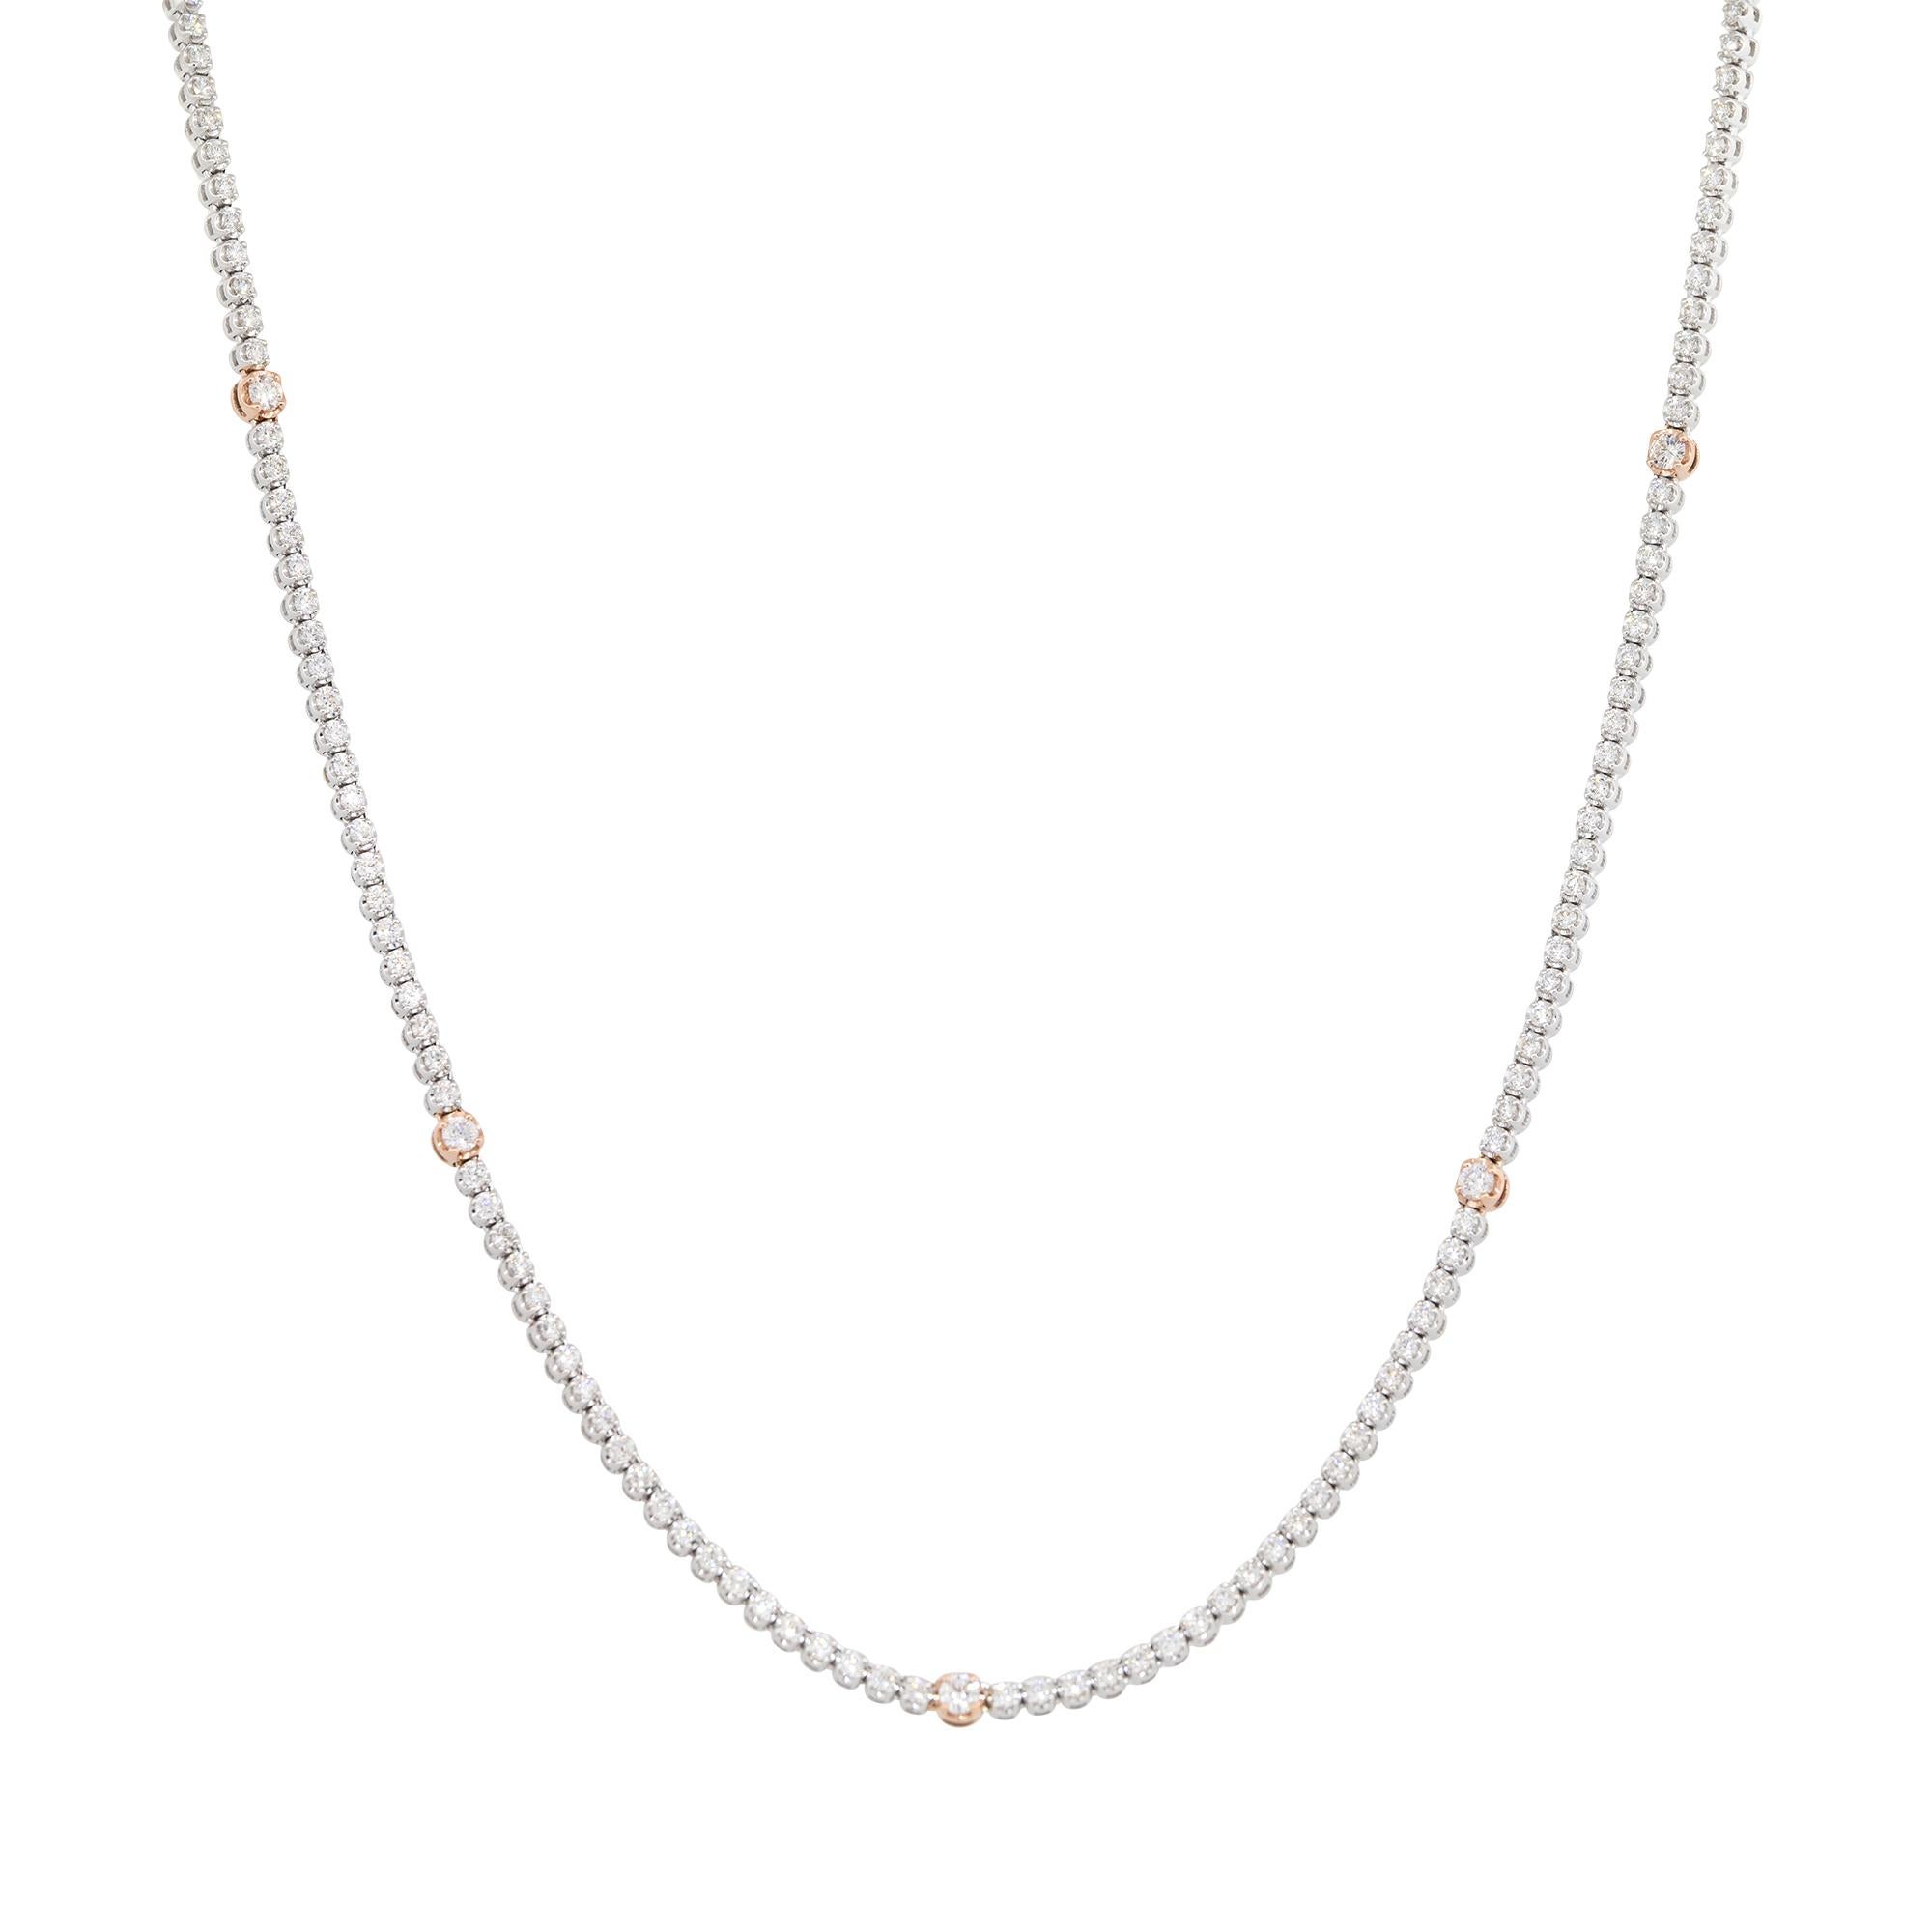 There are many reasons why this tennis necklace is so unique. To begin, not all the diamonds are the same size, as there are 7 larger diamond stations along the necklace. In addition to those stations, the 7 larger diamond stations are also set in